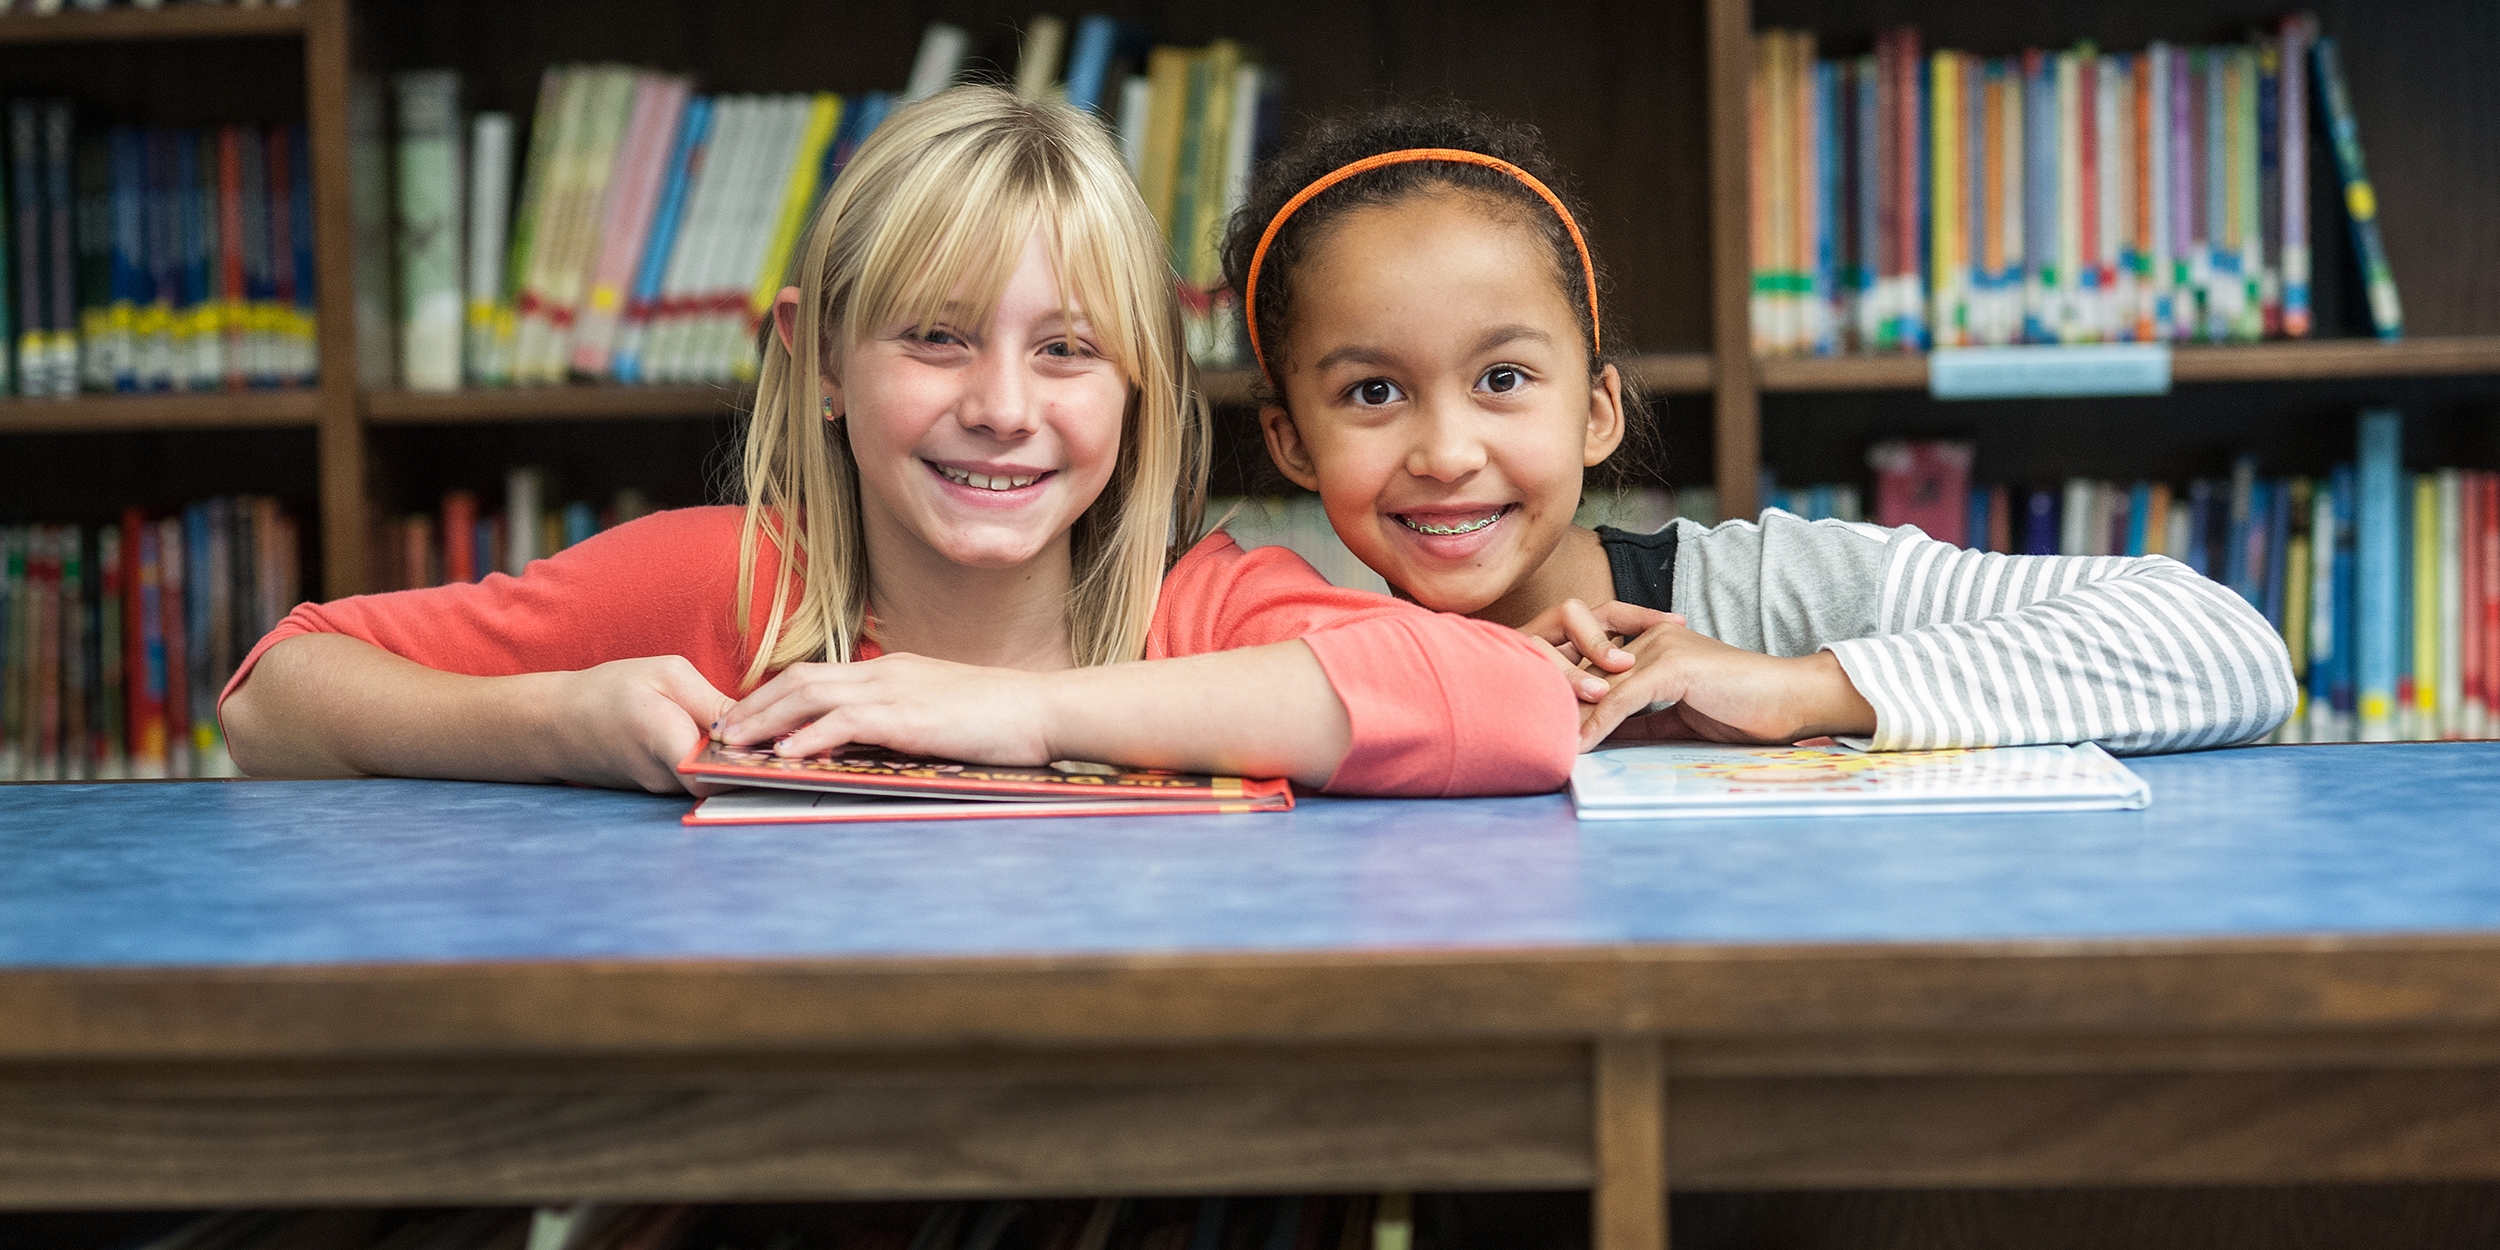 Two third-grade girls, Madison and Justine, smile in the school library at the Save the Children-sponsored afterschool literacy program. The program is held in their elementary school in West Virginia. Photo credit: Susan Warner/Save the Children, February 2015.